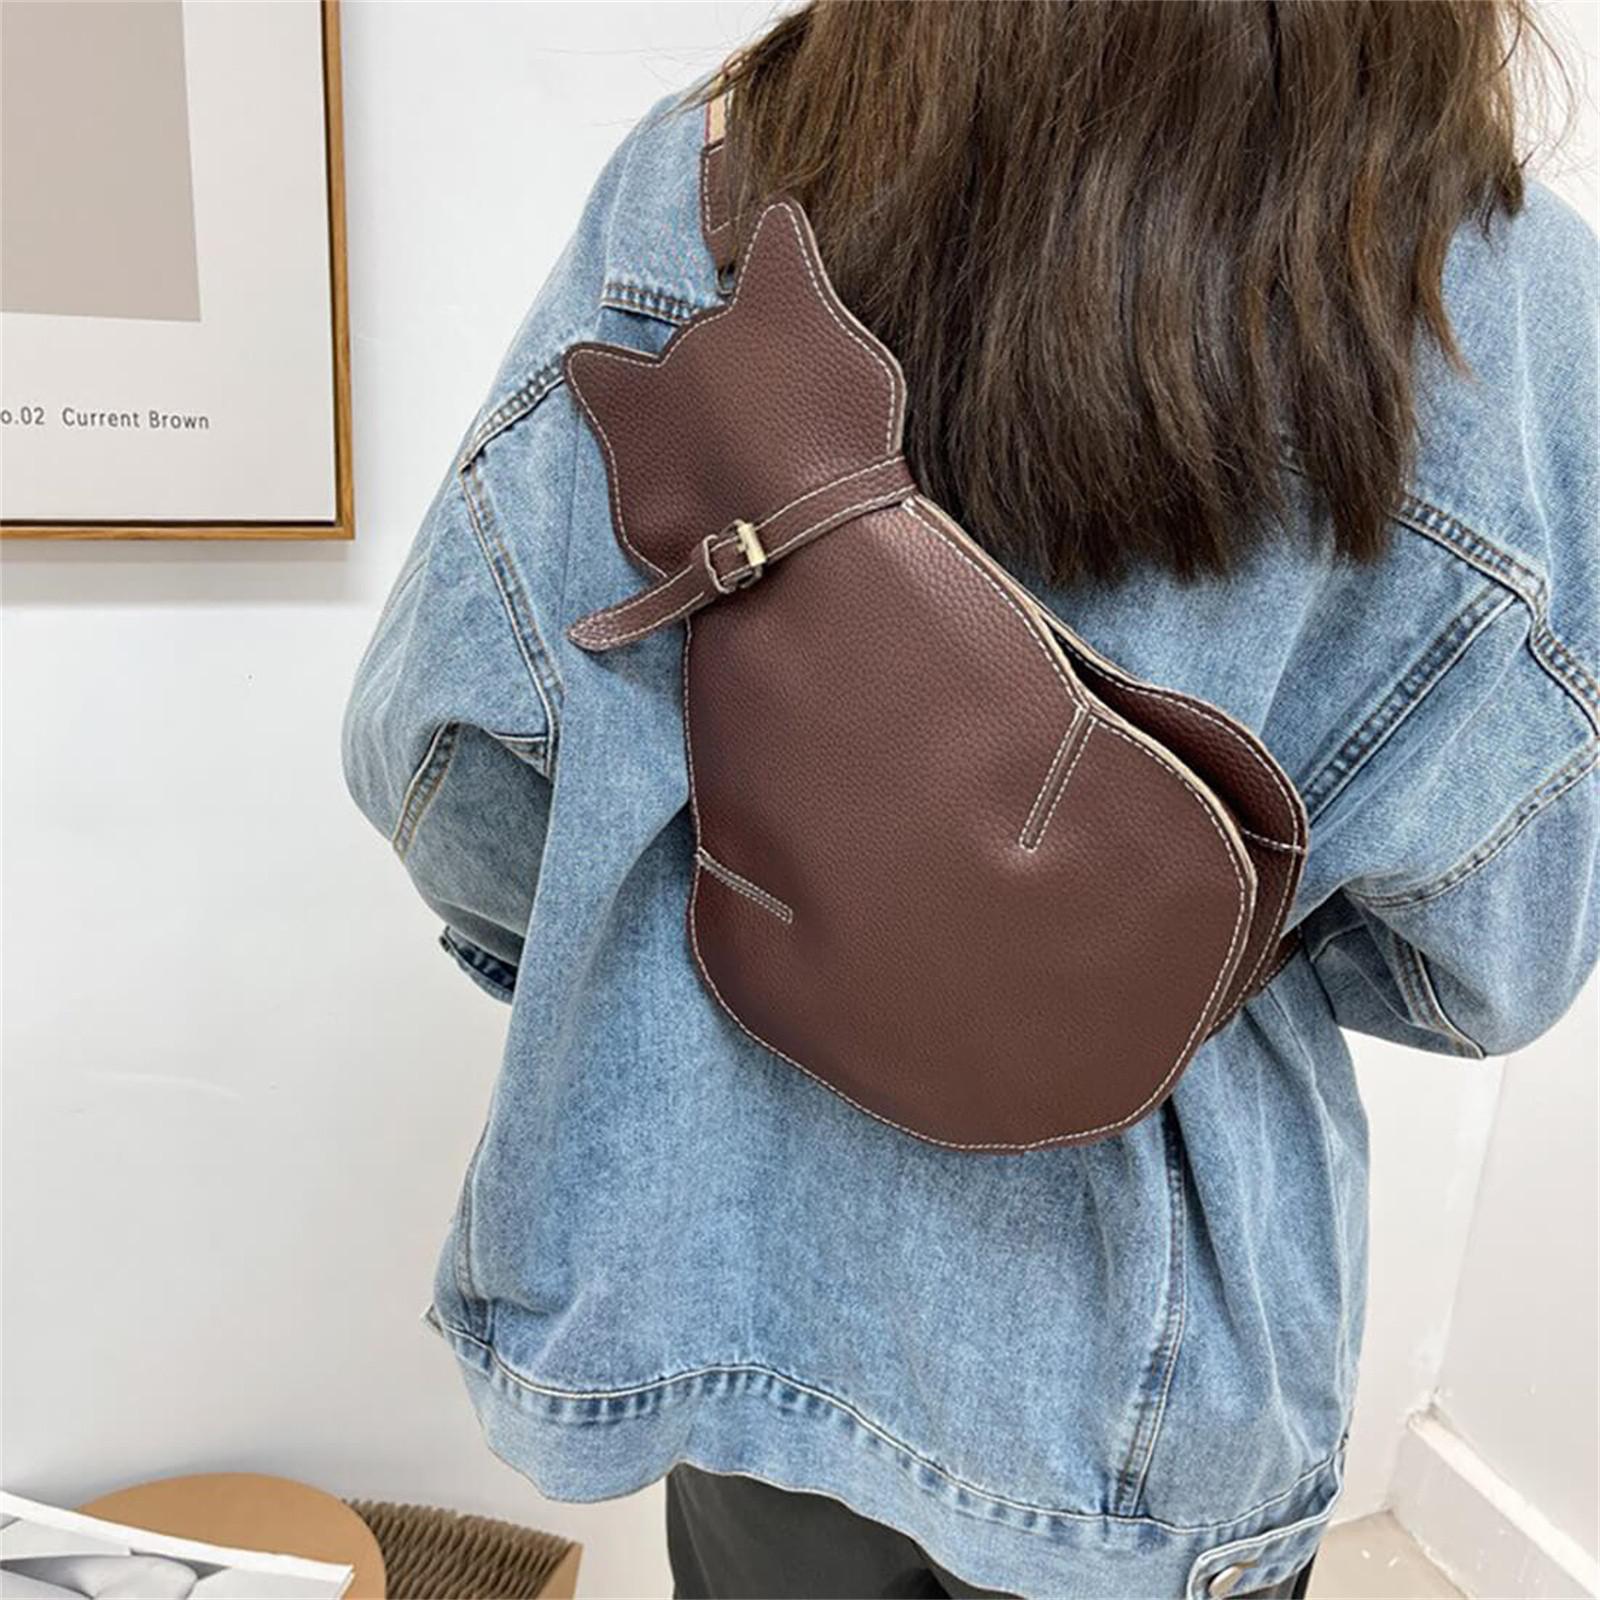 Uniqueness Put On The Cat Bag,Cute Cat Bag, Shoulder Bag, Fashionable Leather Retro Chest Bag, Personalized Cross-body Bag Lady Bags